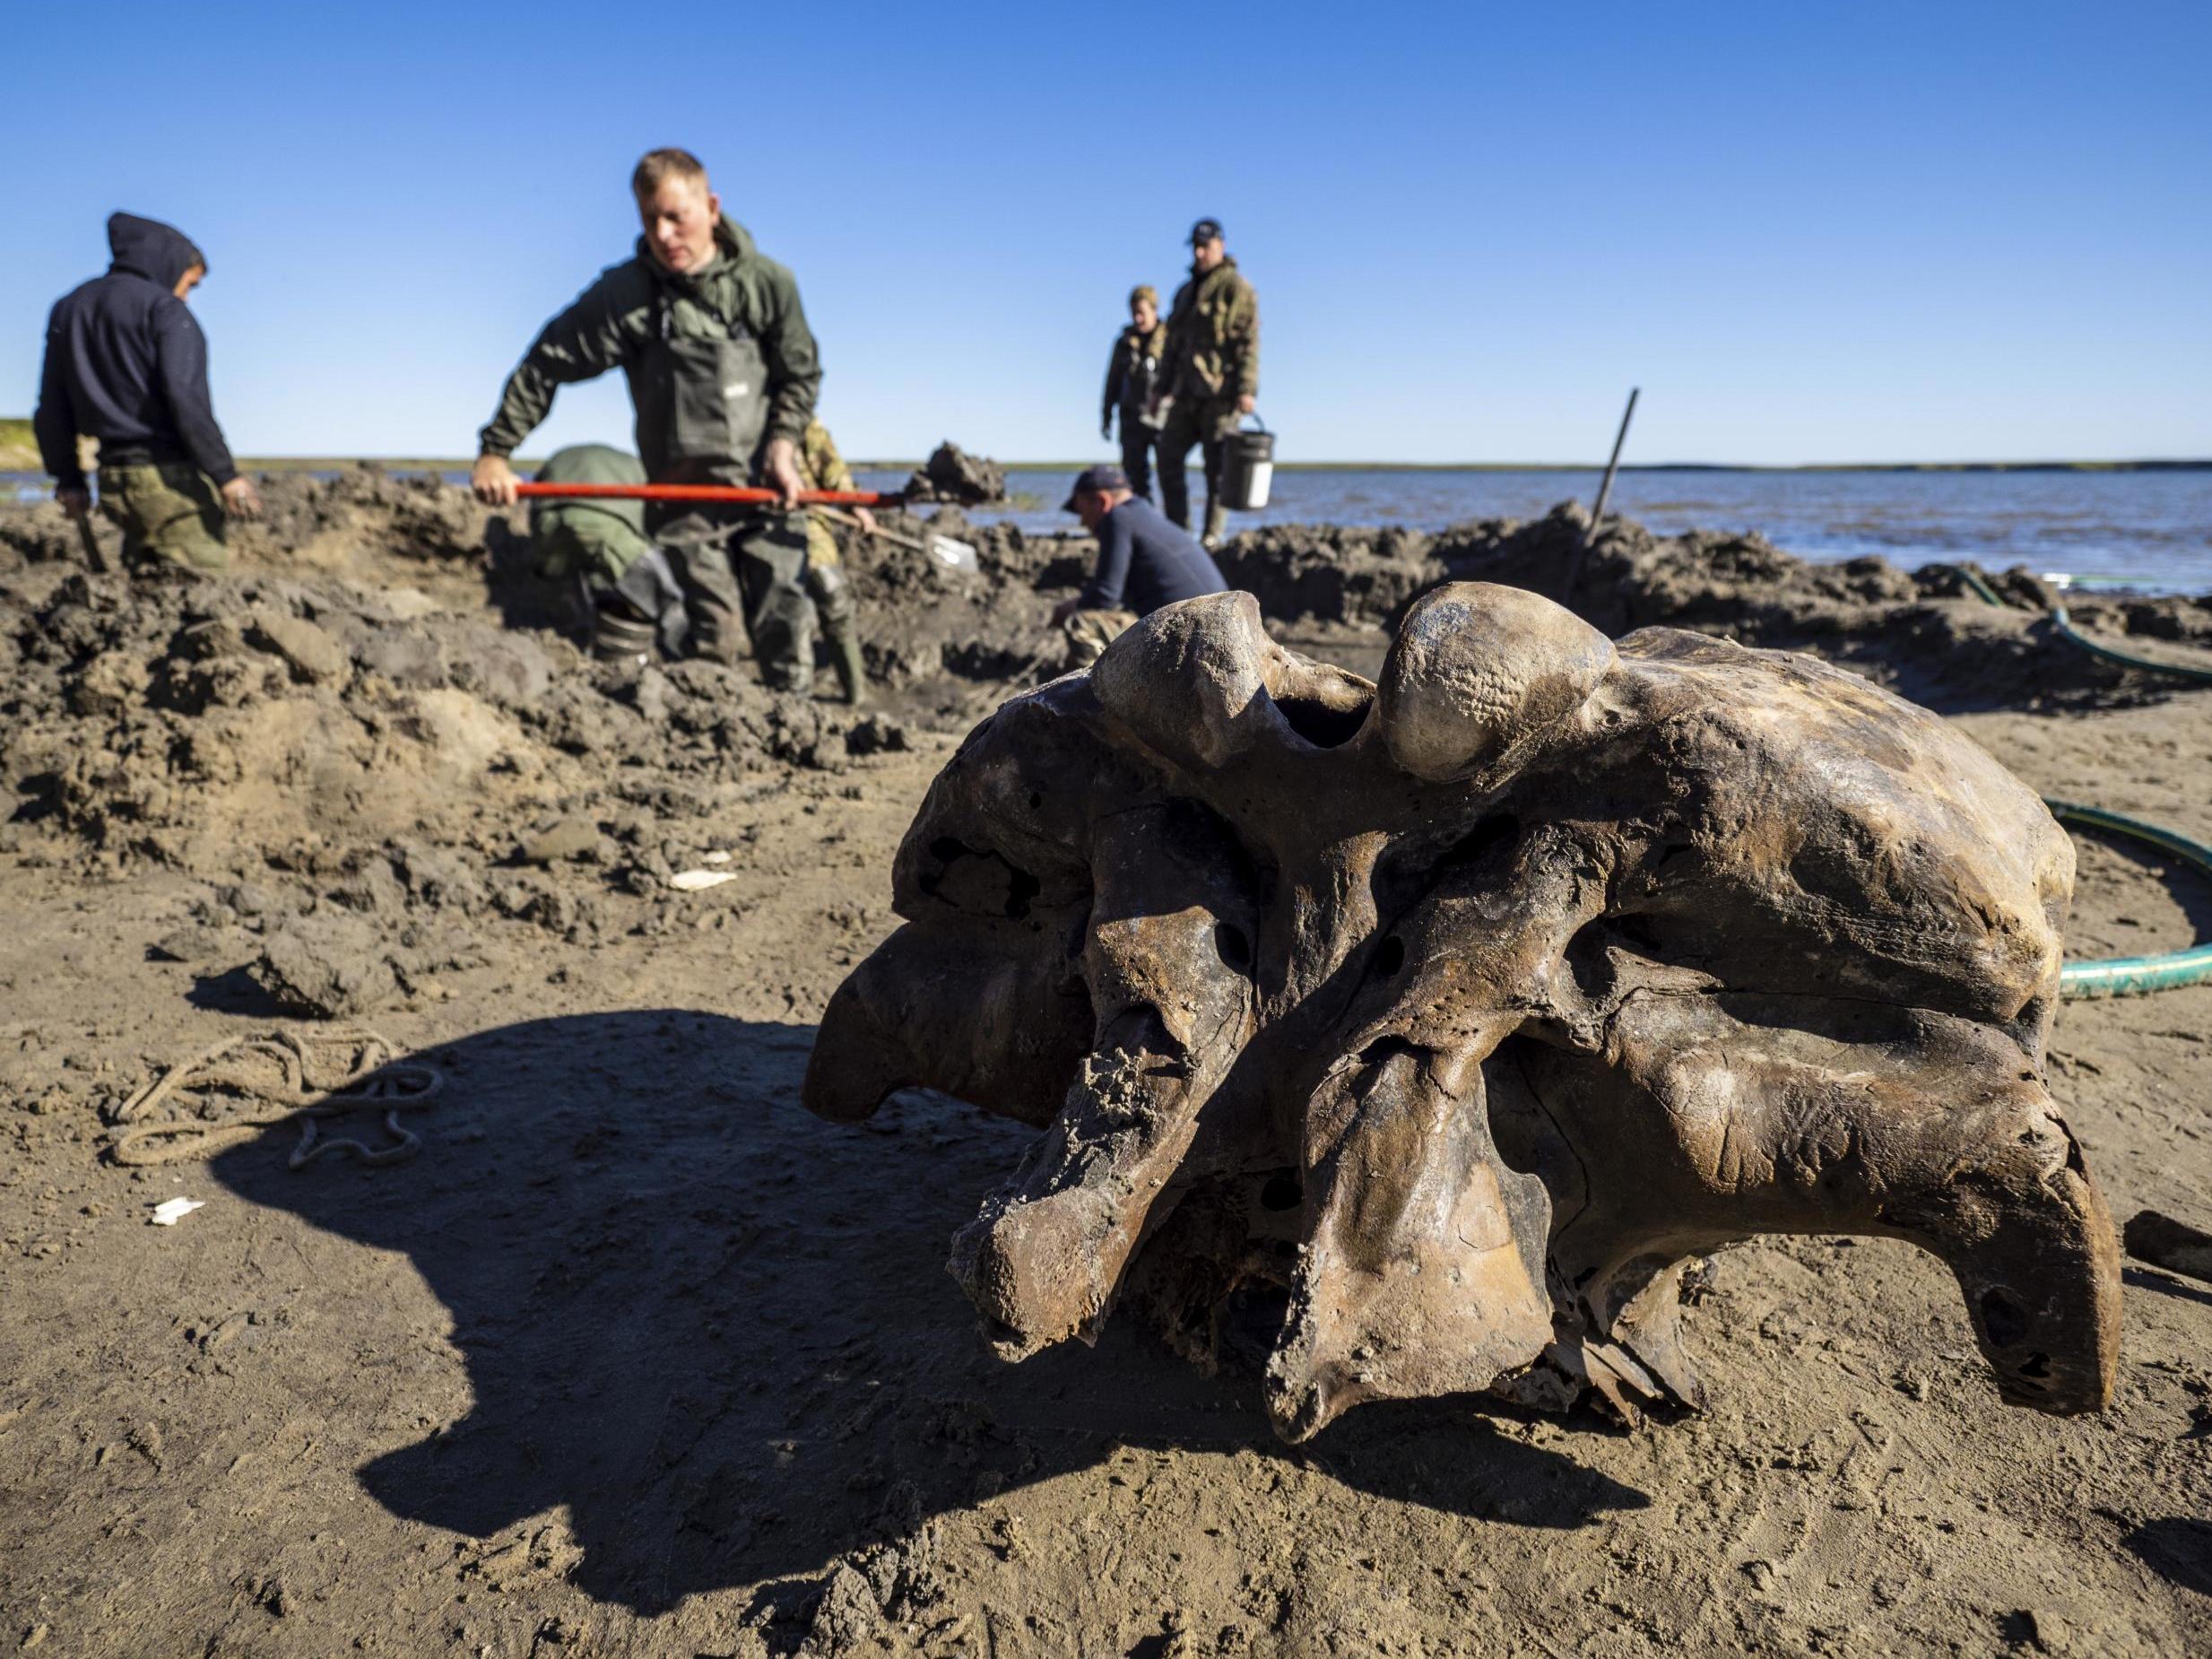 Scientists hope to retrieve the entire skeleton - a rare find that could help deepen the knowledge about mammoths that have died out around 10,000 years ago.